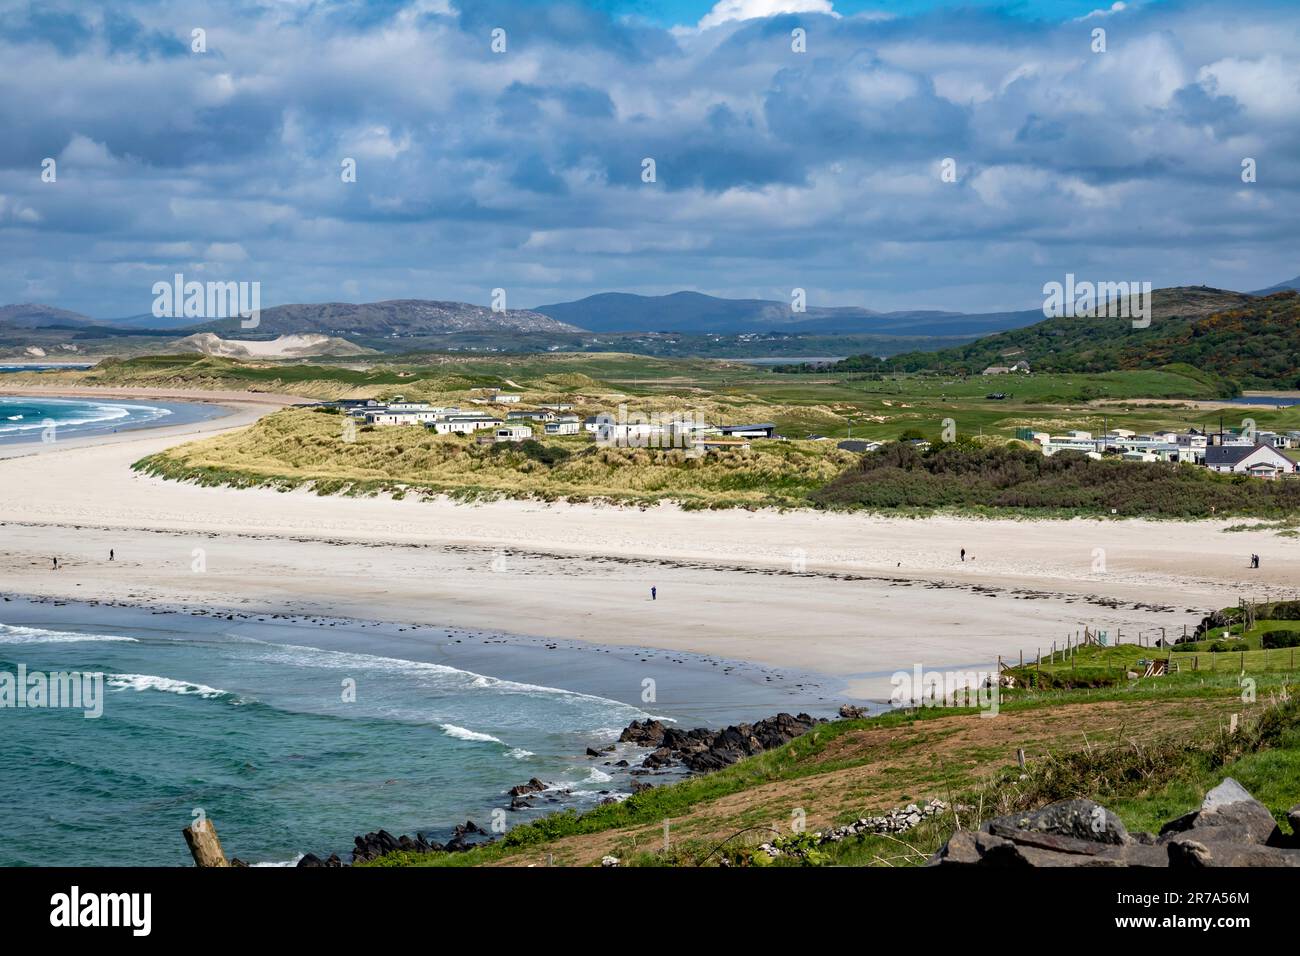 Narin Strand seen from the viewpoint in Portnoo, County Donegal - Ireland Stock Photo